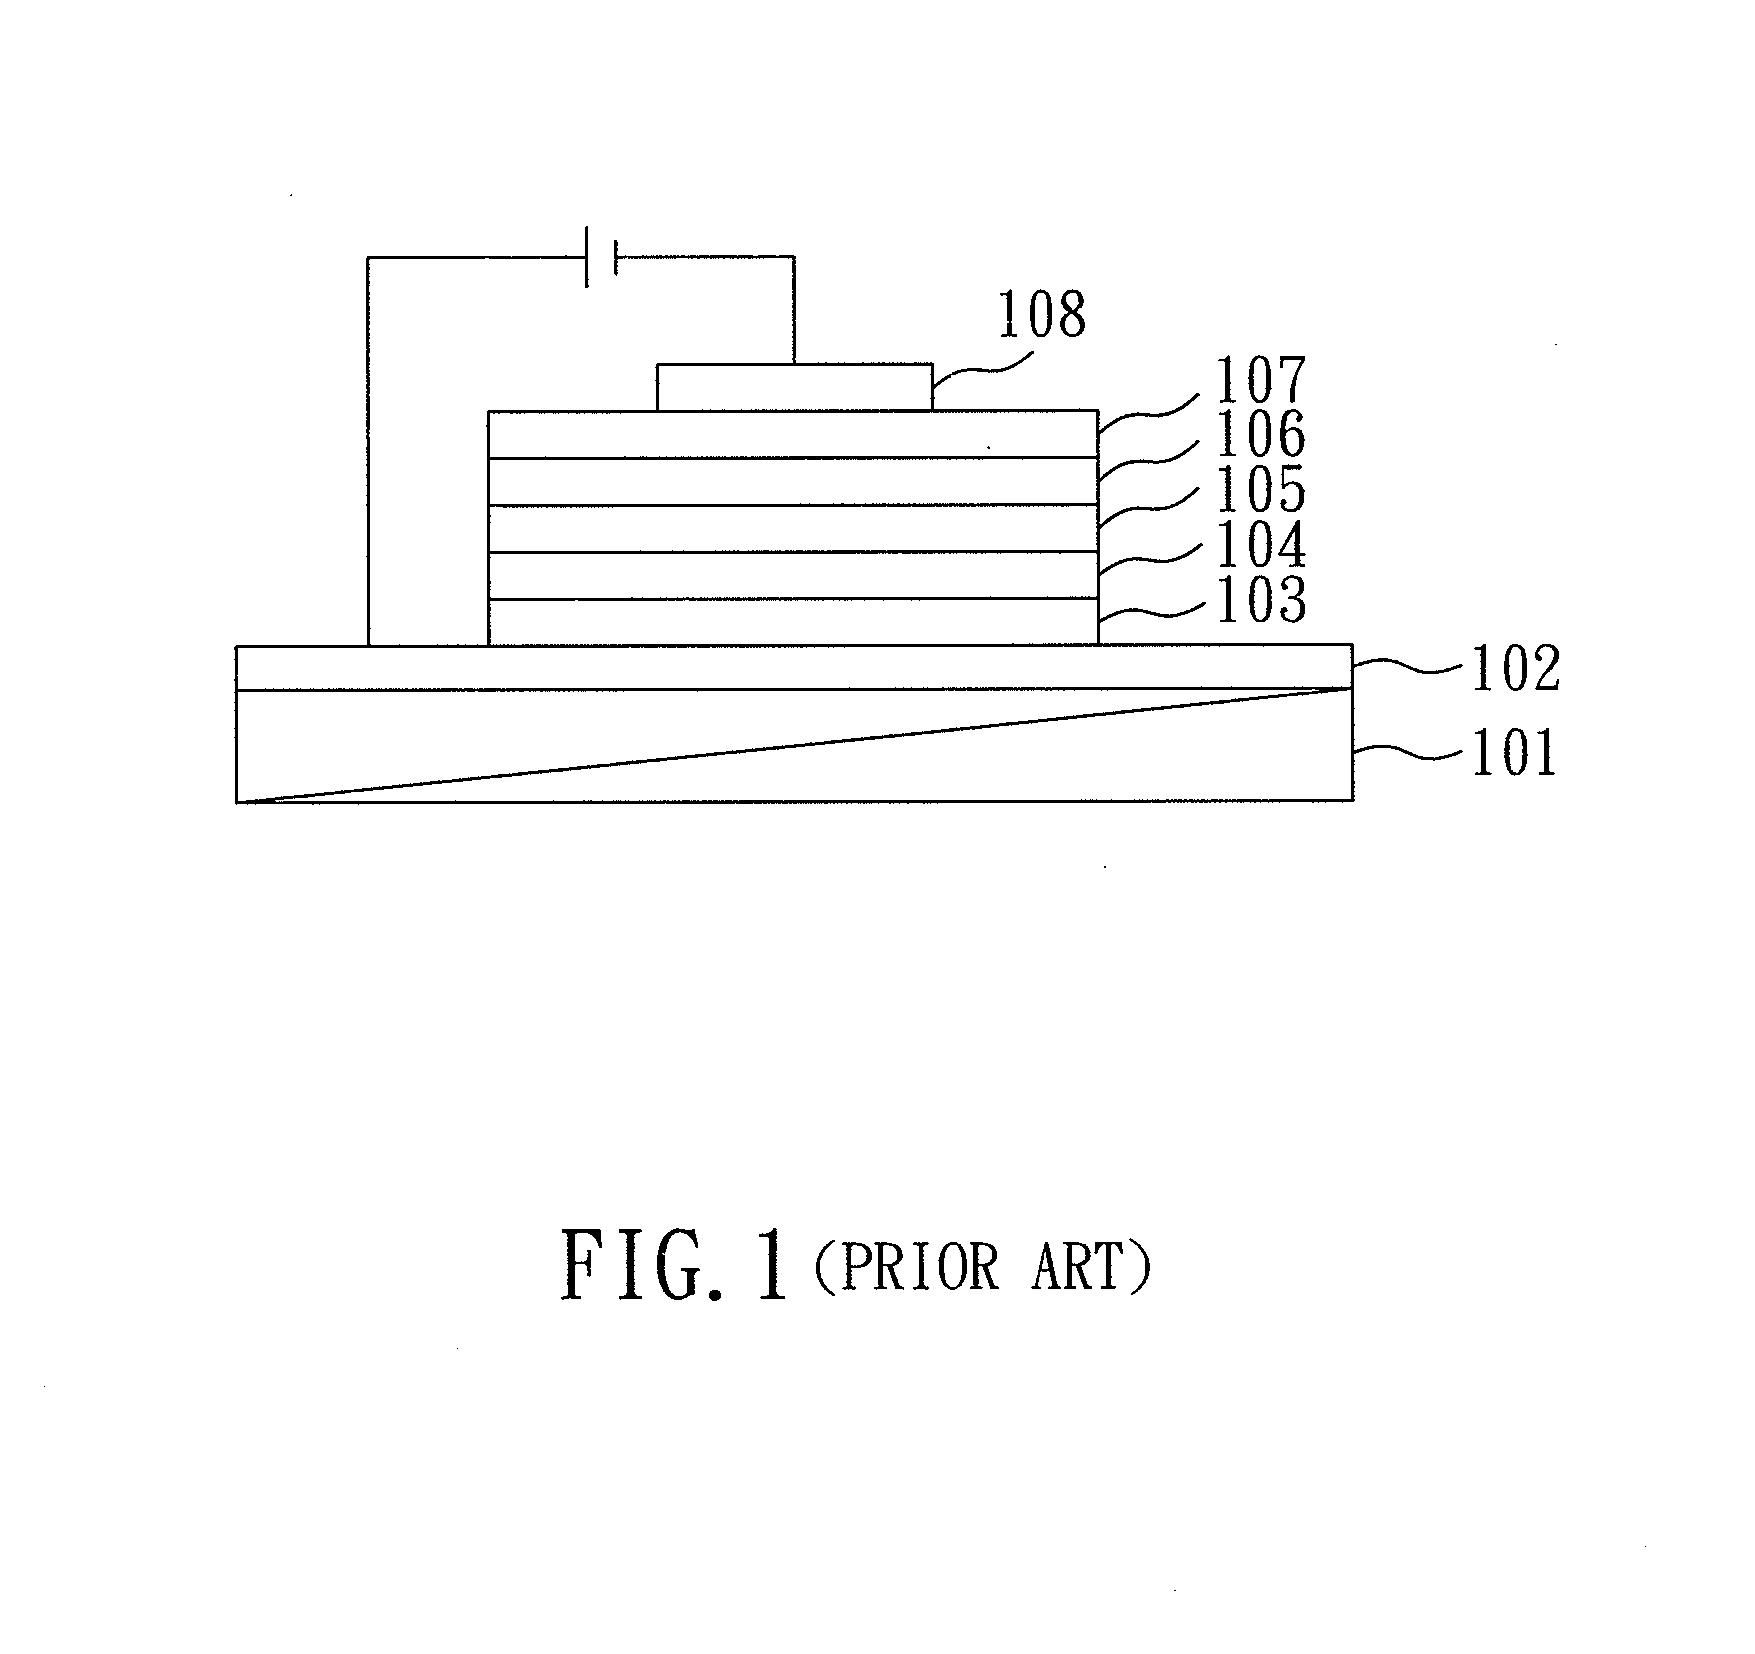 Organic light-emitting diode with high color rendering